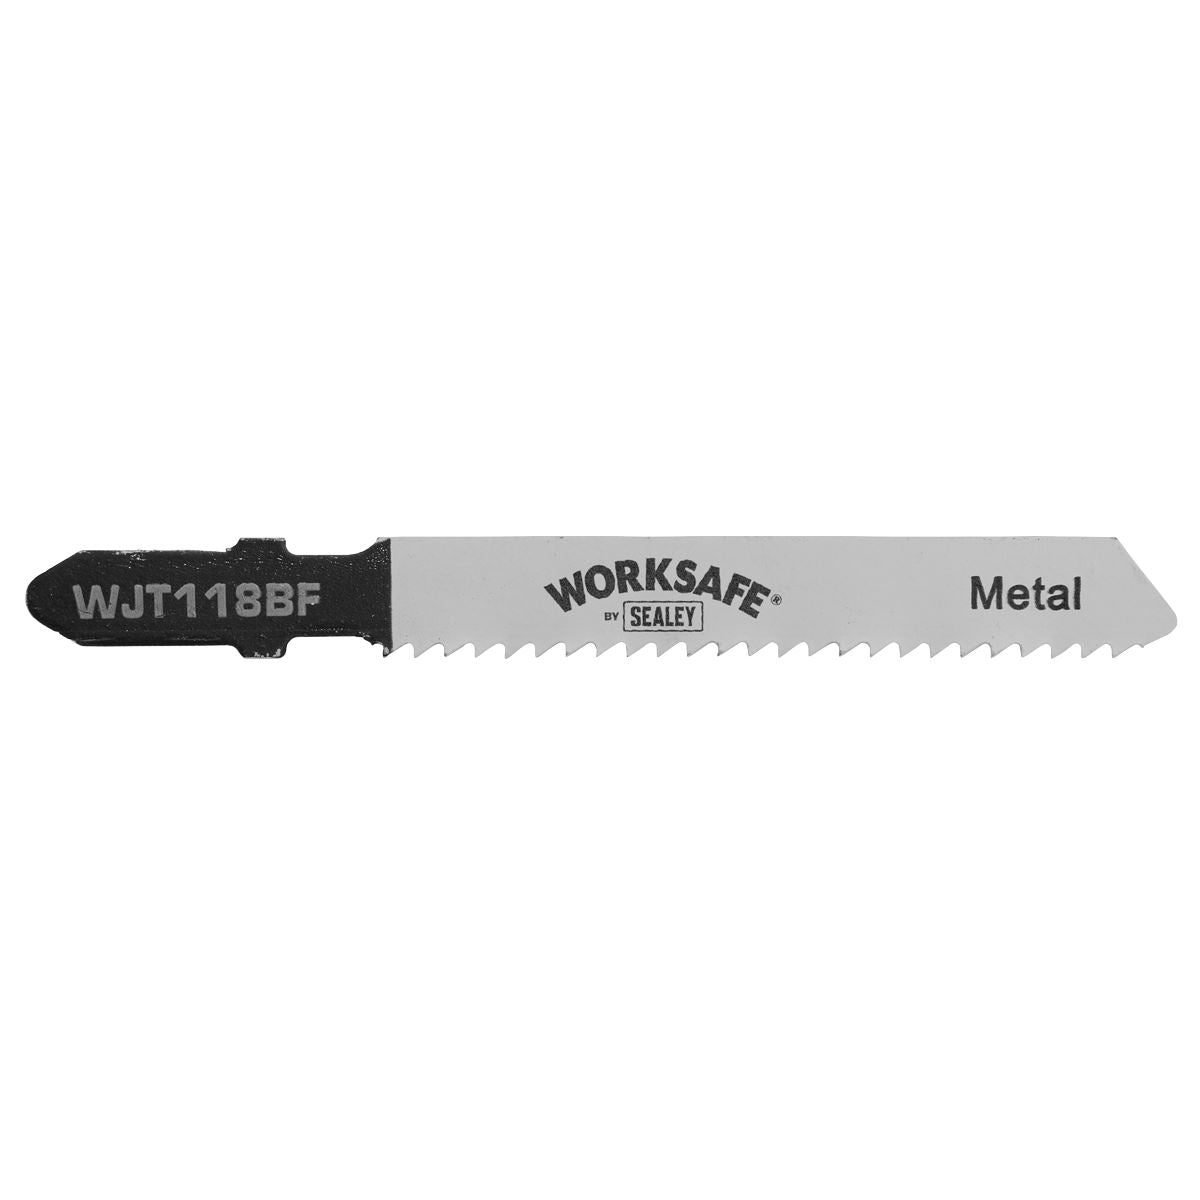 Worksafe by Sealey Jigsaw Blade Metal 55mm 12tpi - Pack of 5